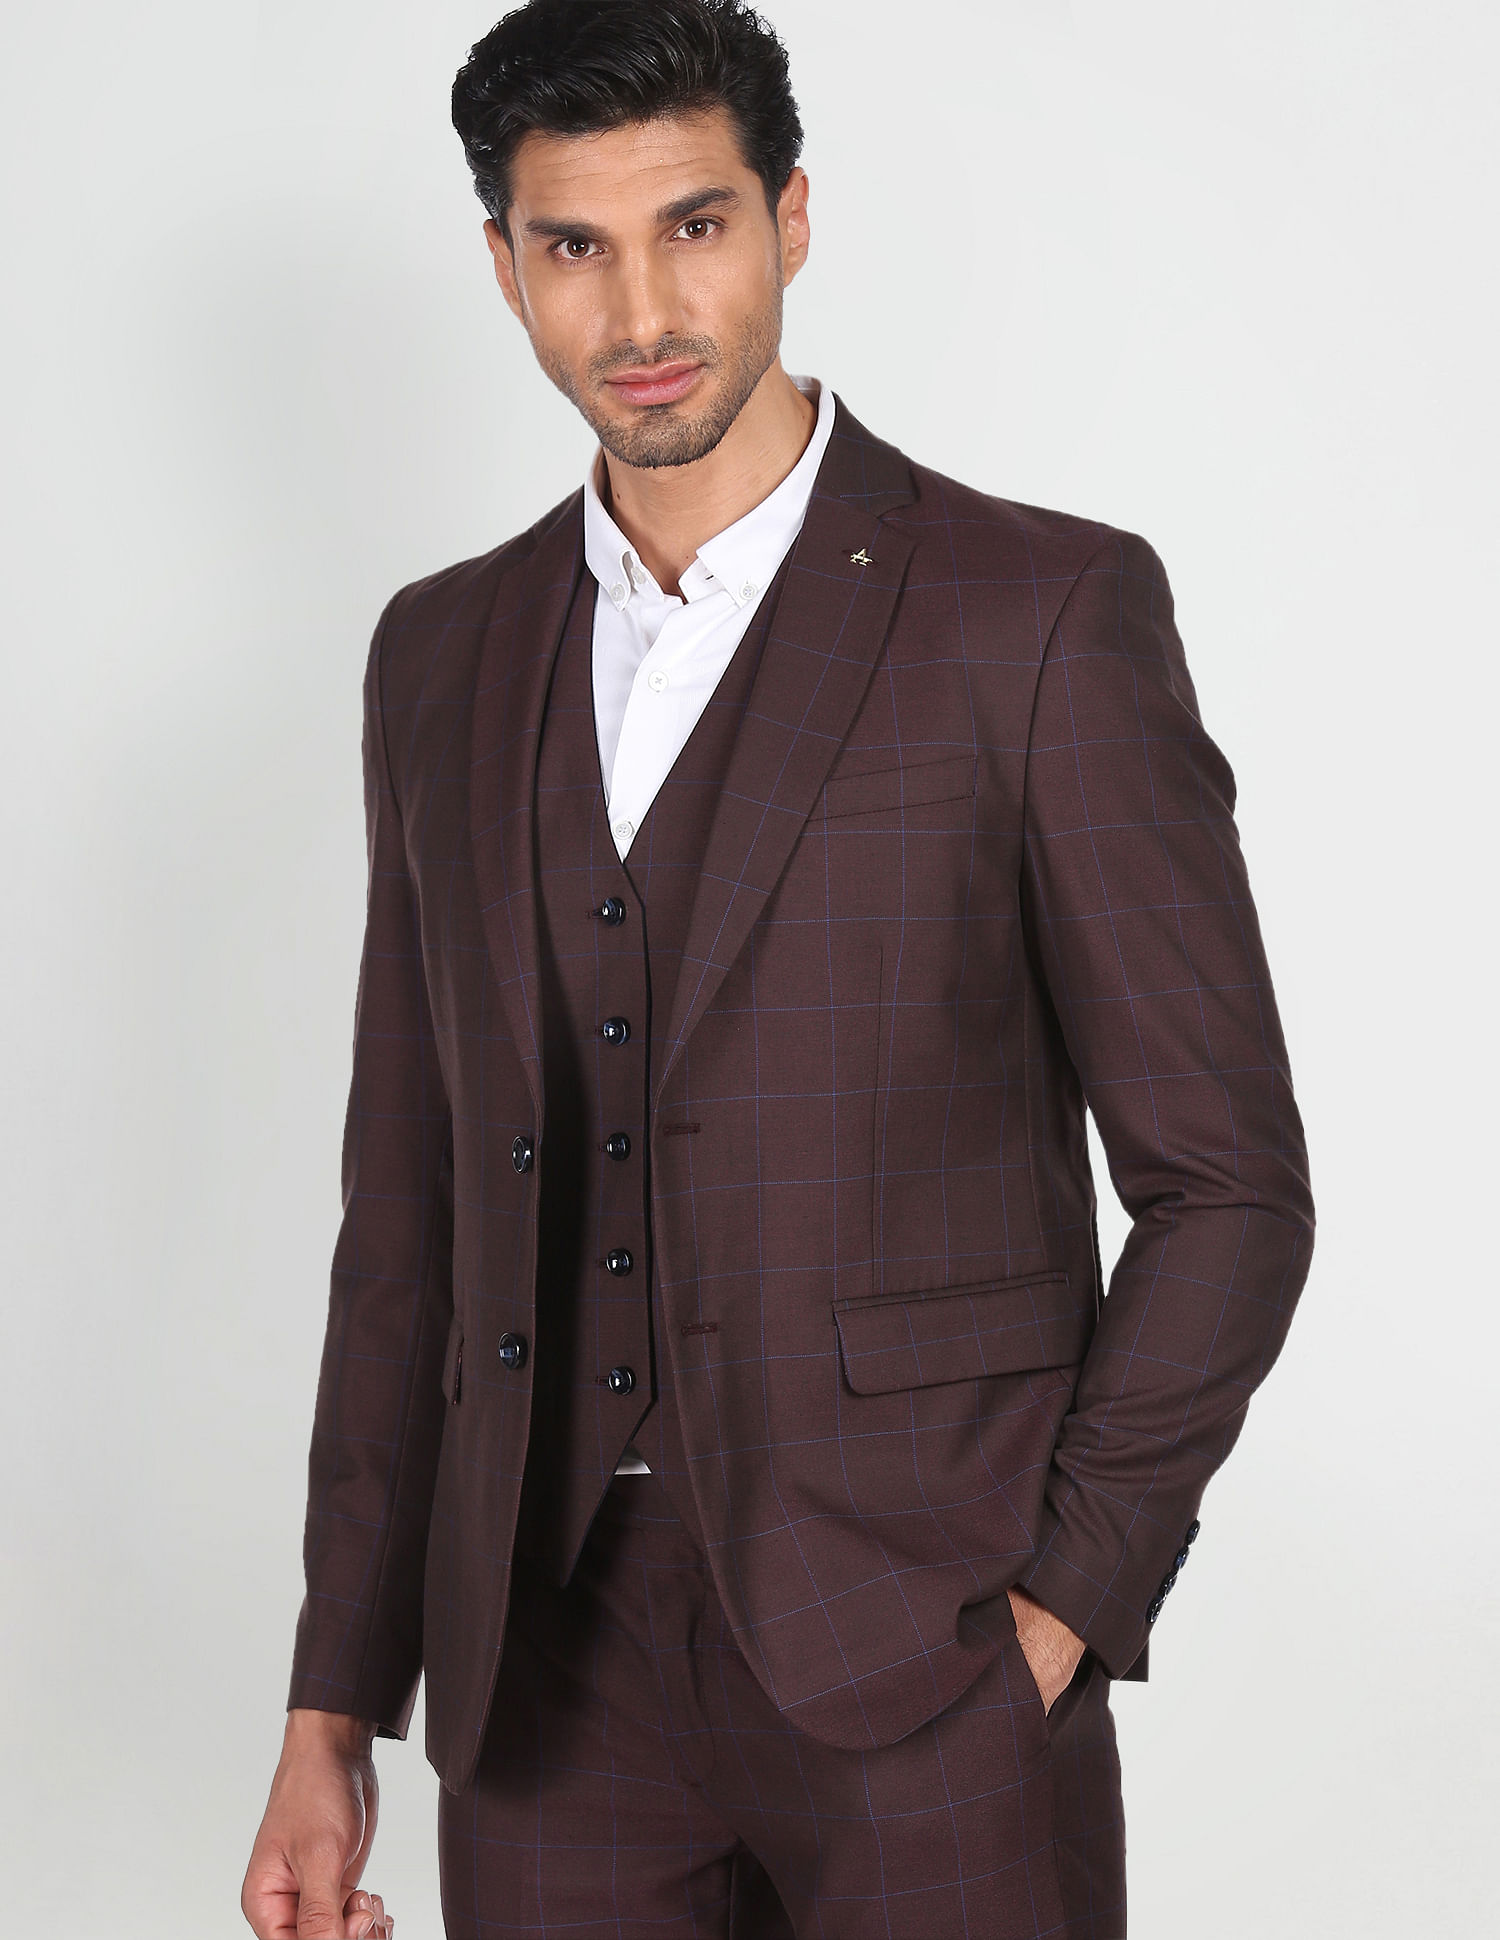 Imported Mens Suit In Dark Blue With Printed Waistcoat & Tie – Suvidha  Fashion